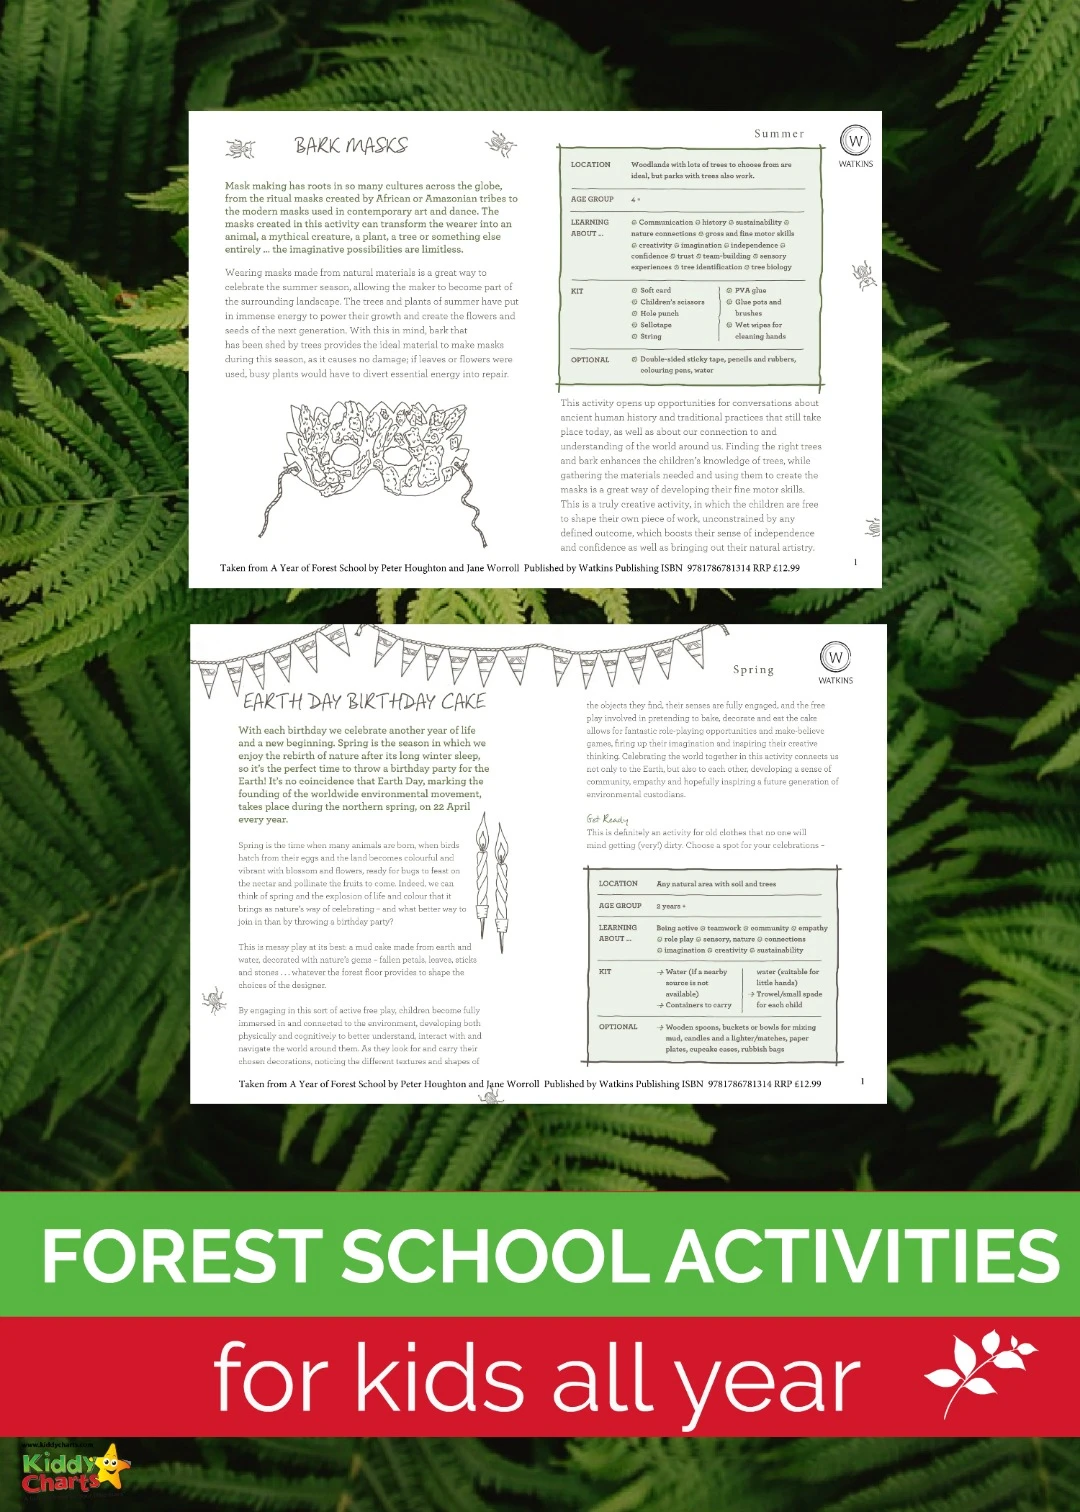 Seasonal forest school activities for you and the kids; so you don't have to have the sun shining to have fun in the forest! #kids #activities #nature #outdoors